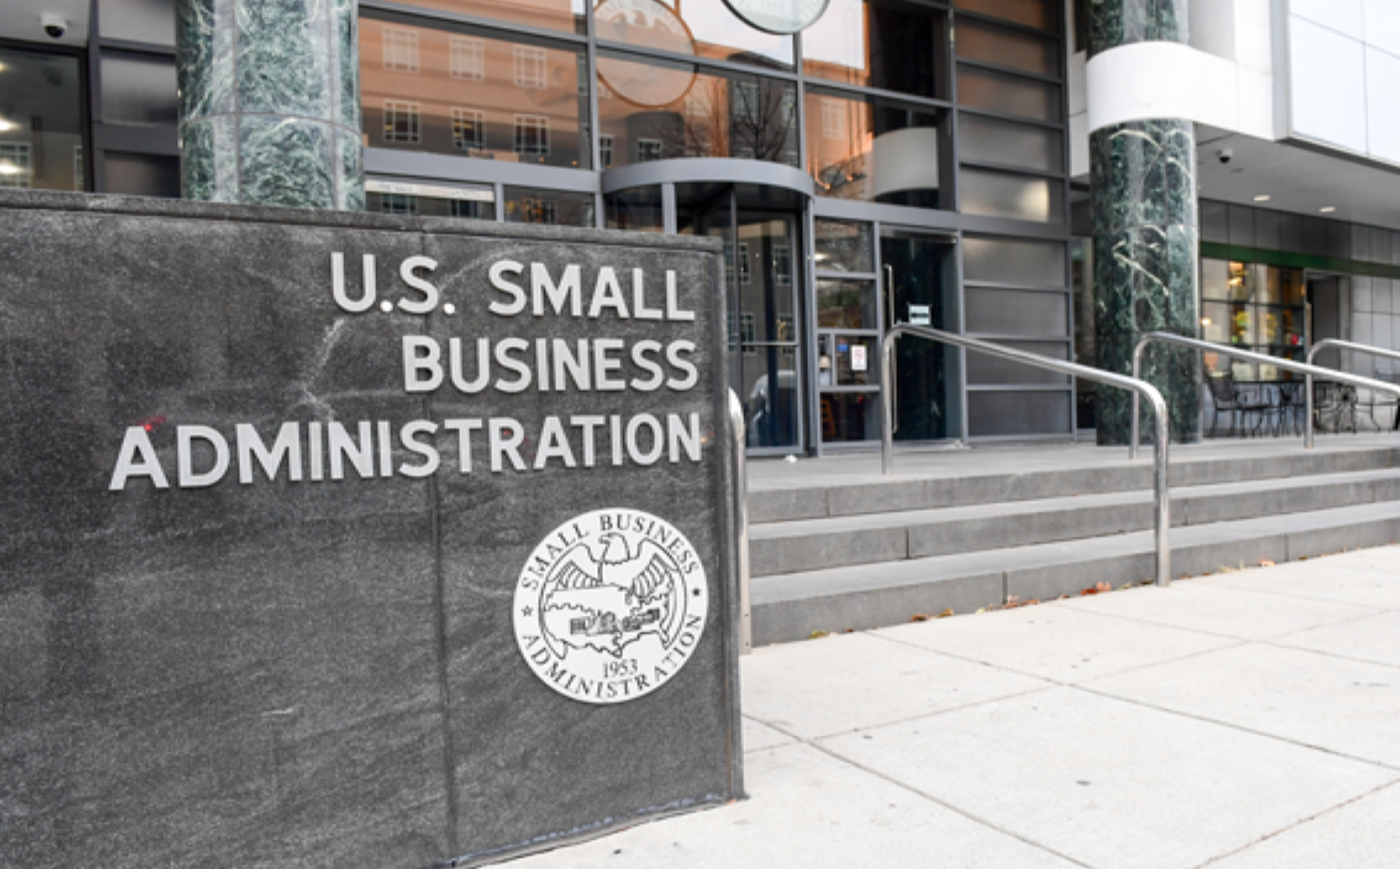 U.S. Small Business Administration building